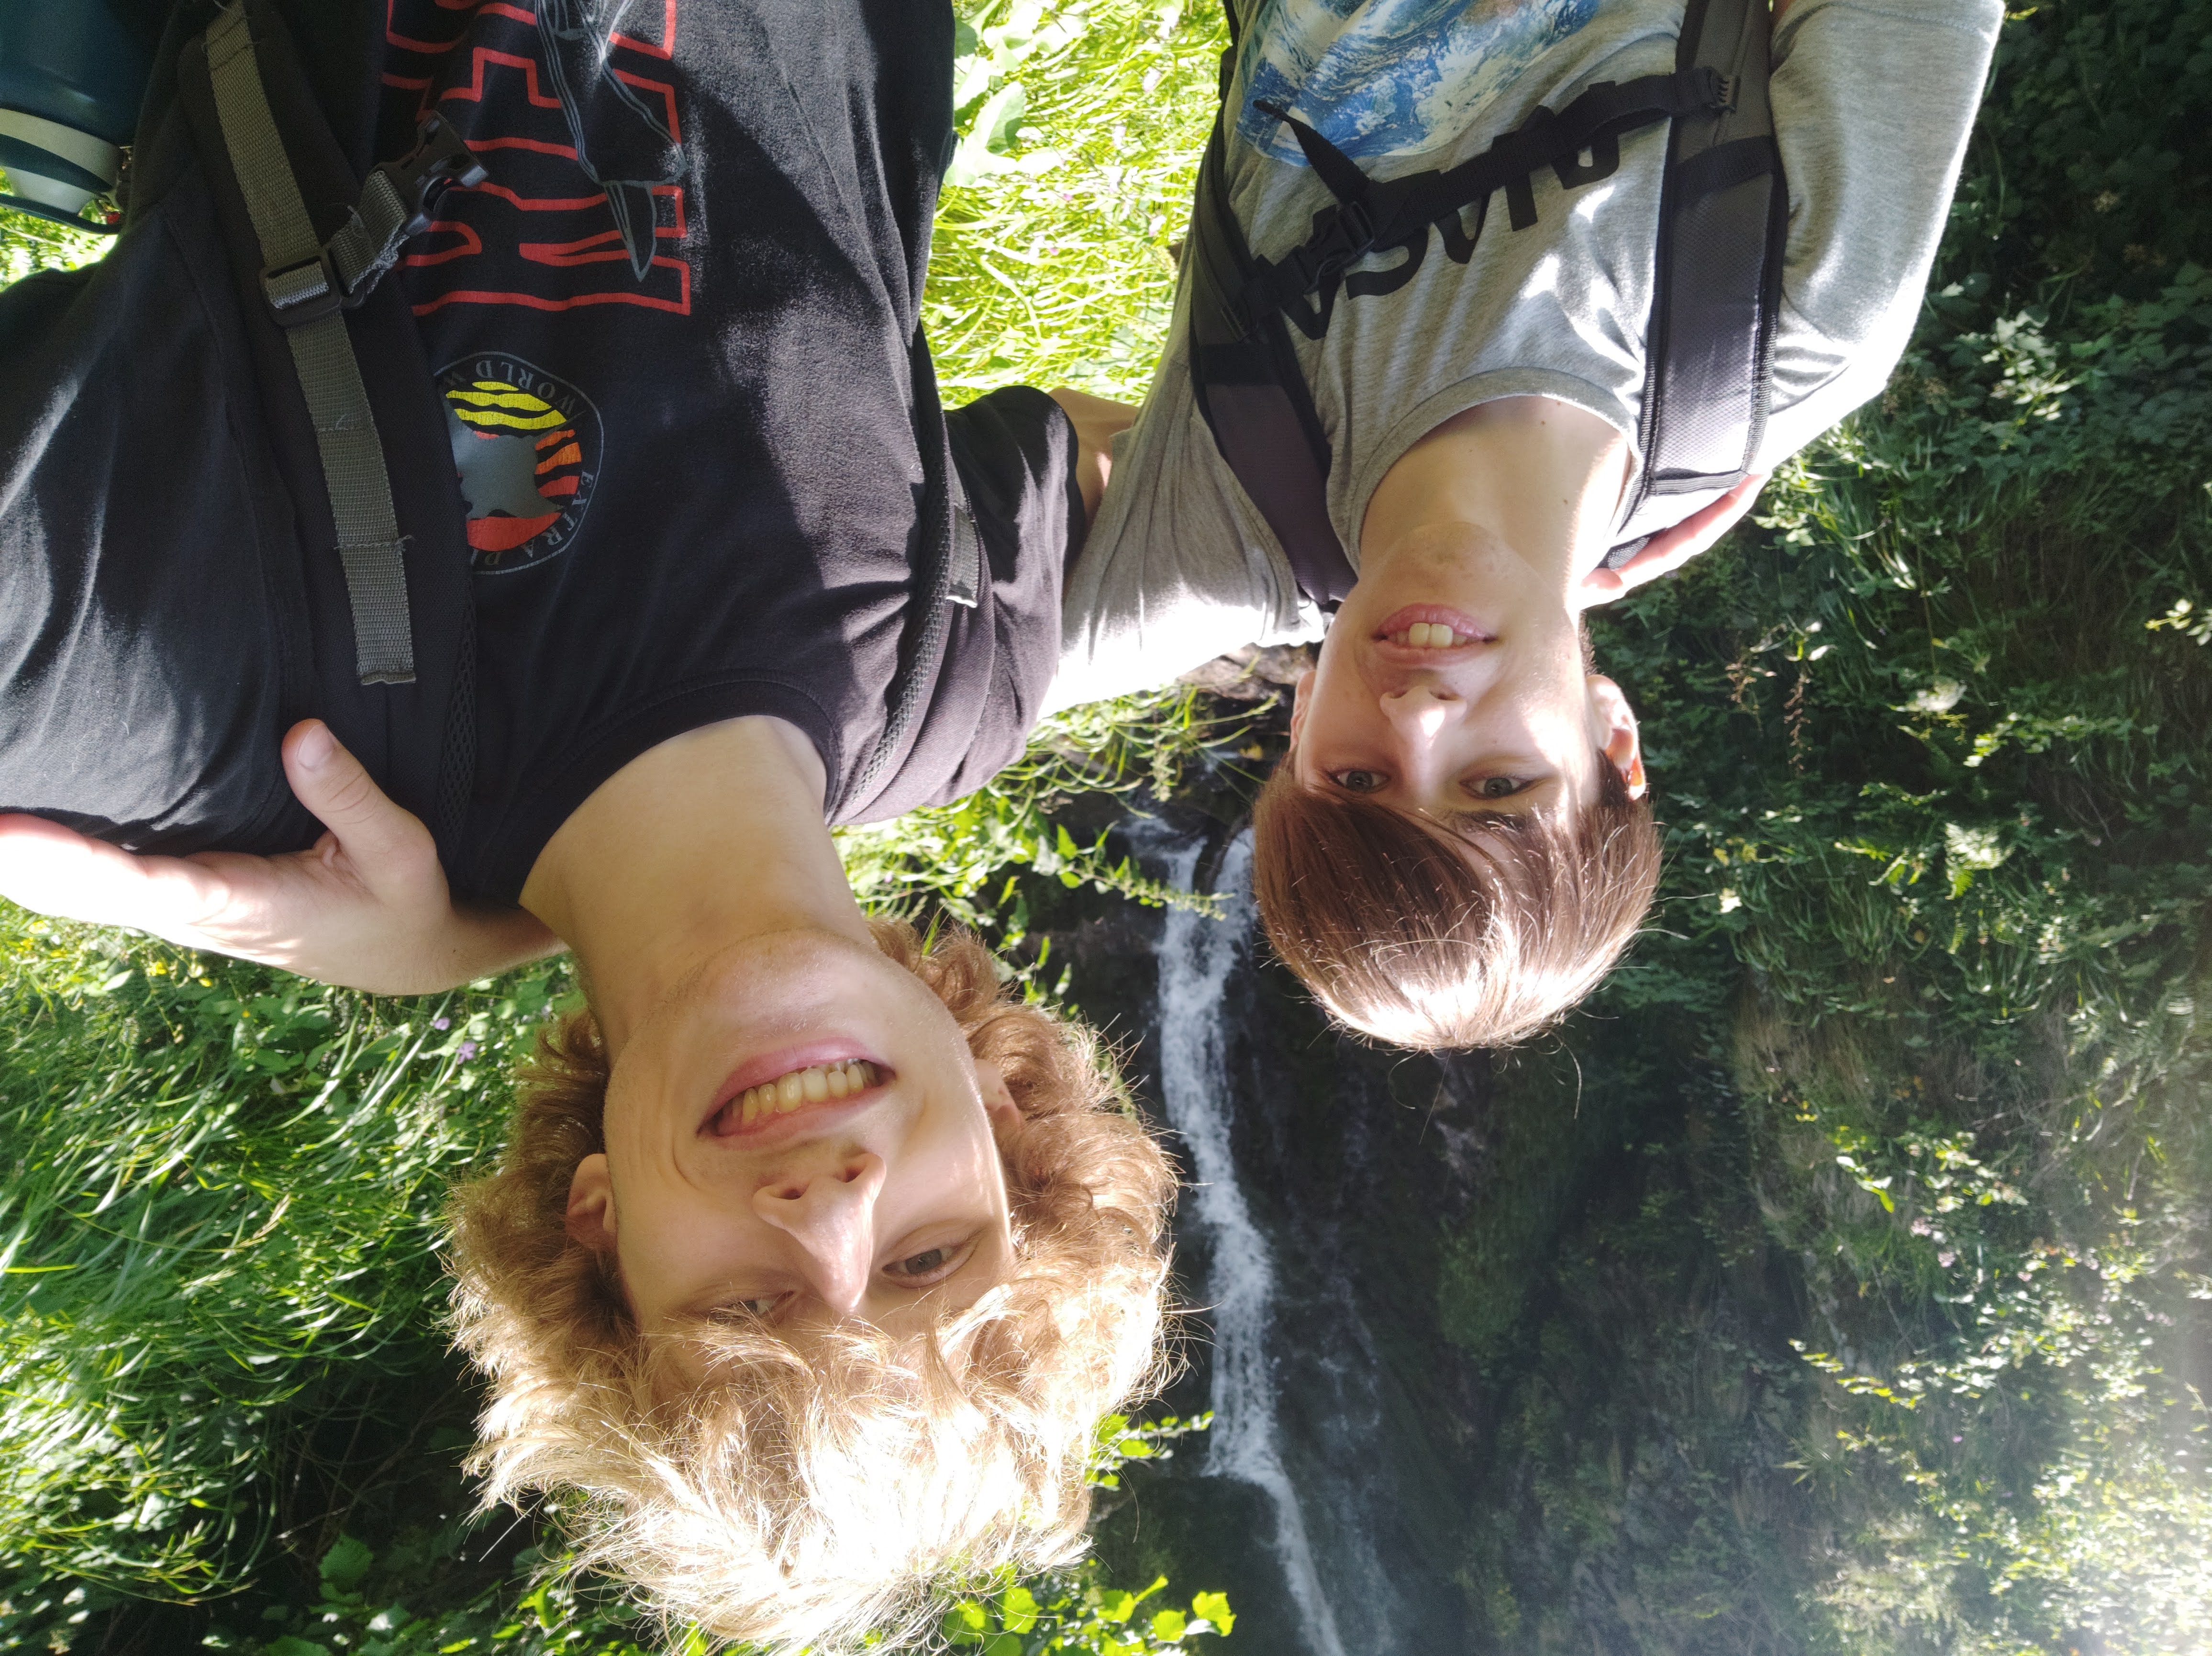 A profile picture with lucas and his brother on a hiking trip